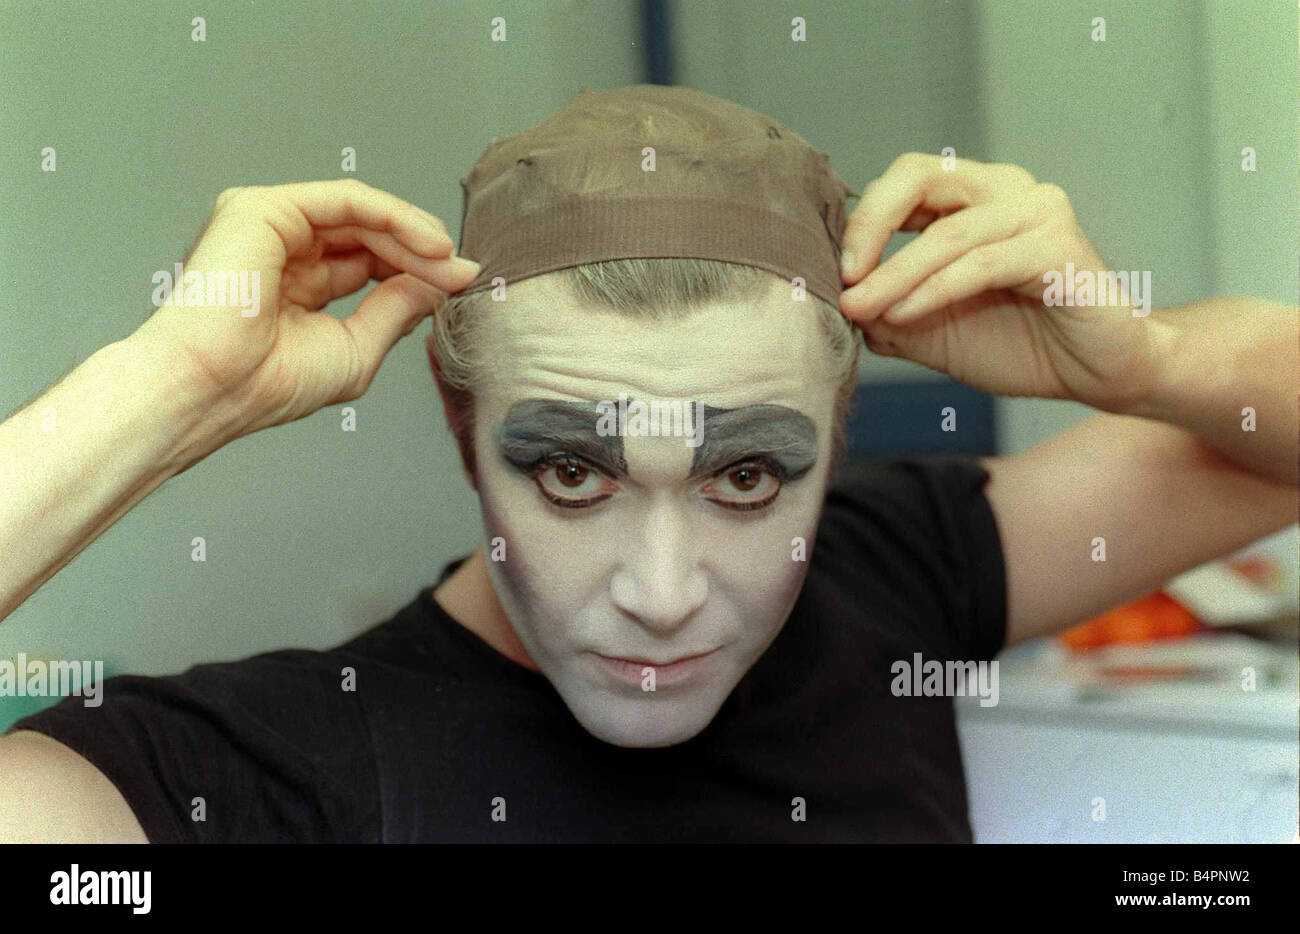 Darren Day Rocky Horror Picture Show September 1999 dressing room being made up as transsexual character called Frank N Furter in cult stage musical singer actor Stock Photo